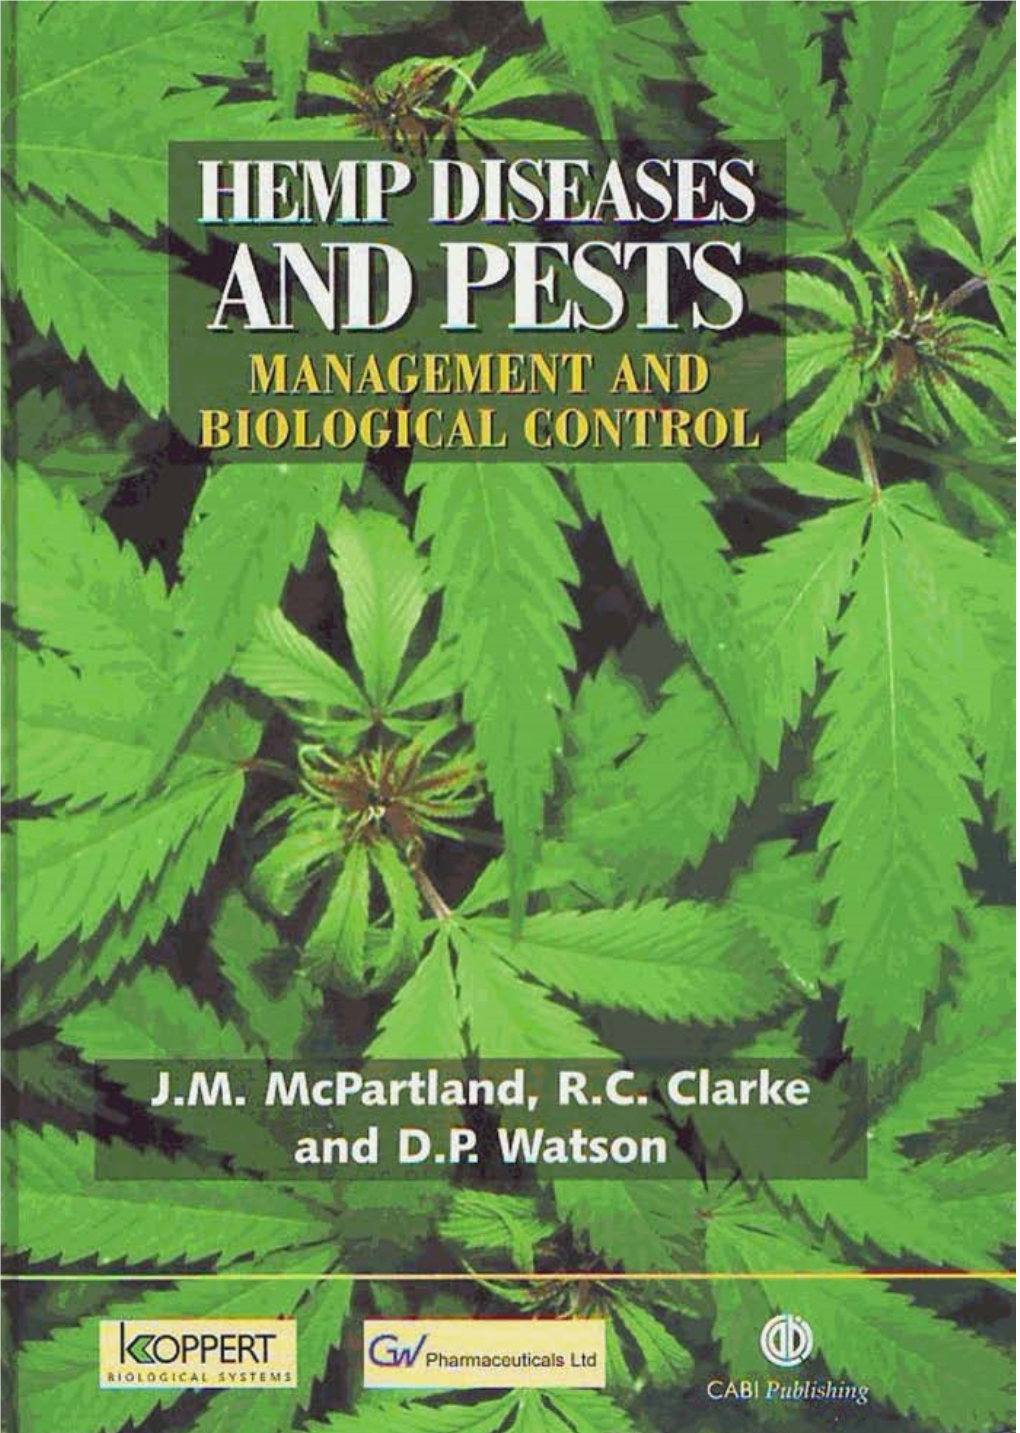 “Hemp Diseases and Pests Management And